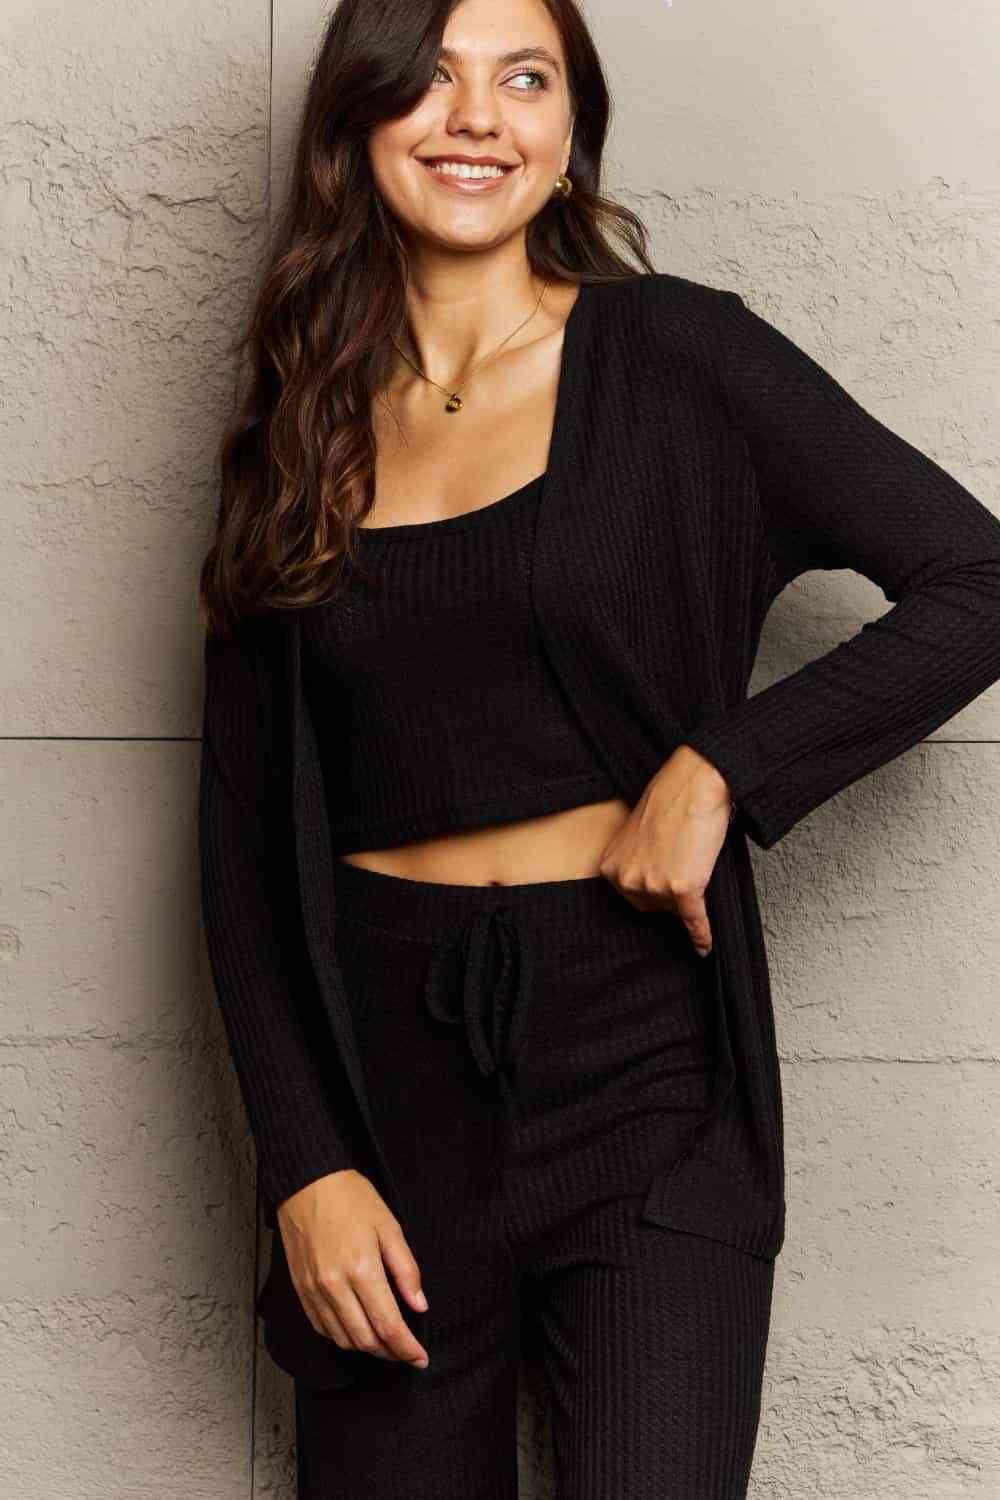 Ninexis Full Size Cropped Top, Long Pants and Cardigan Lounge Set - Vesteeto